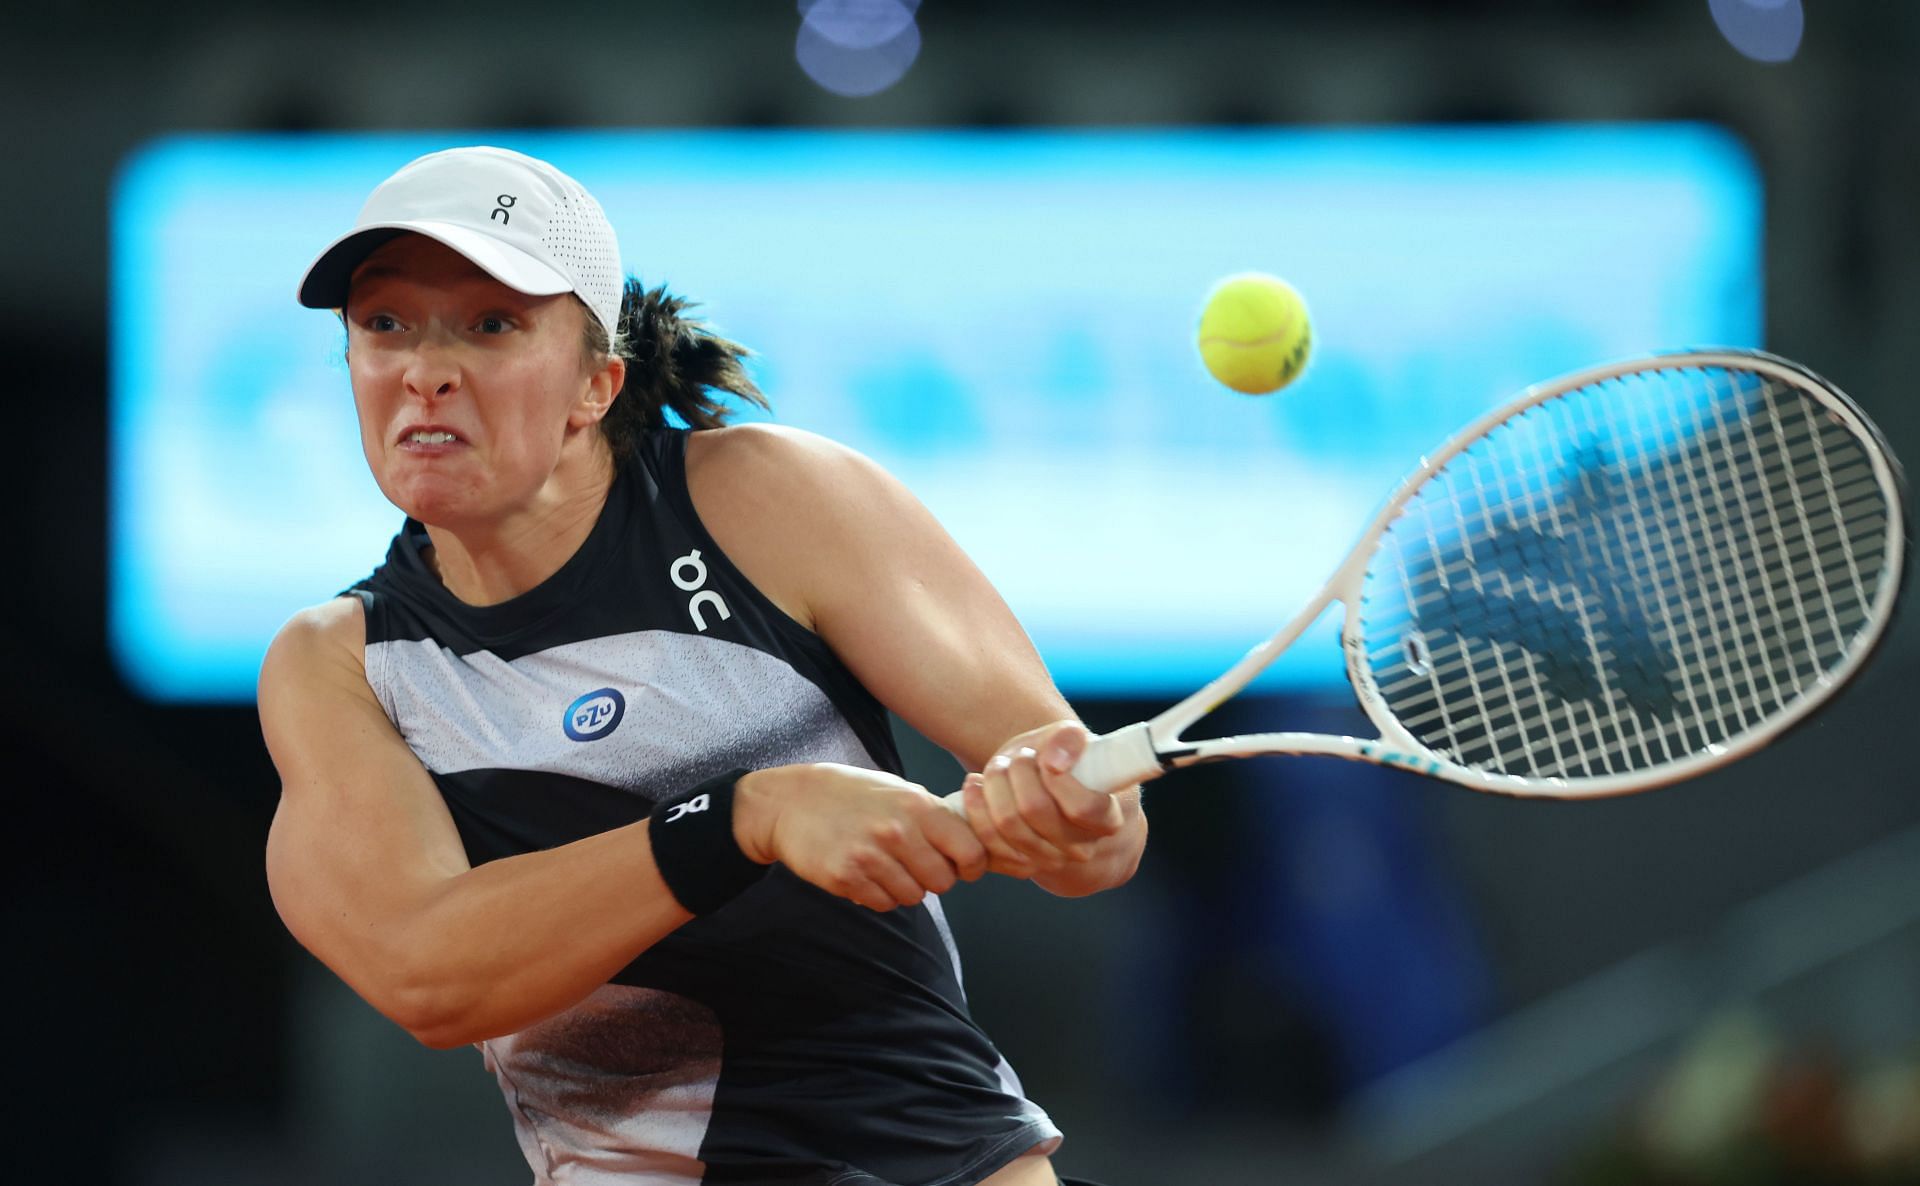 Mutua Madrid Open 2023 TV Schedule Today: Start time, order of play, live streaming details & more - Day 9